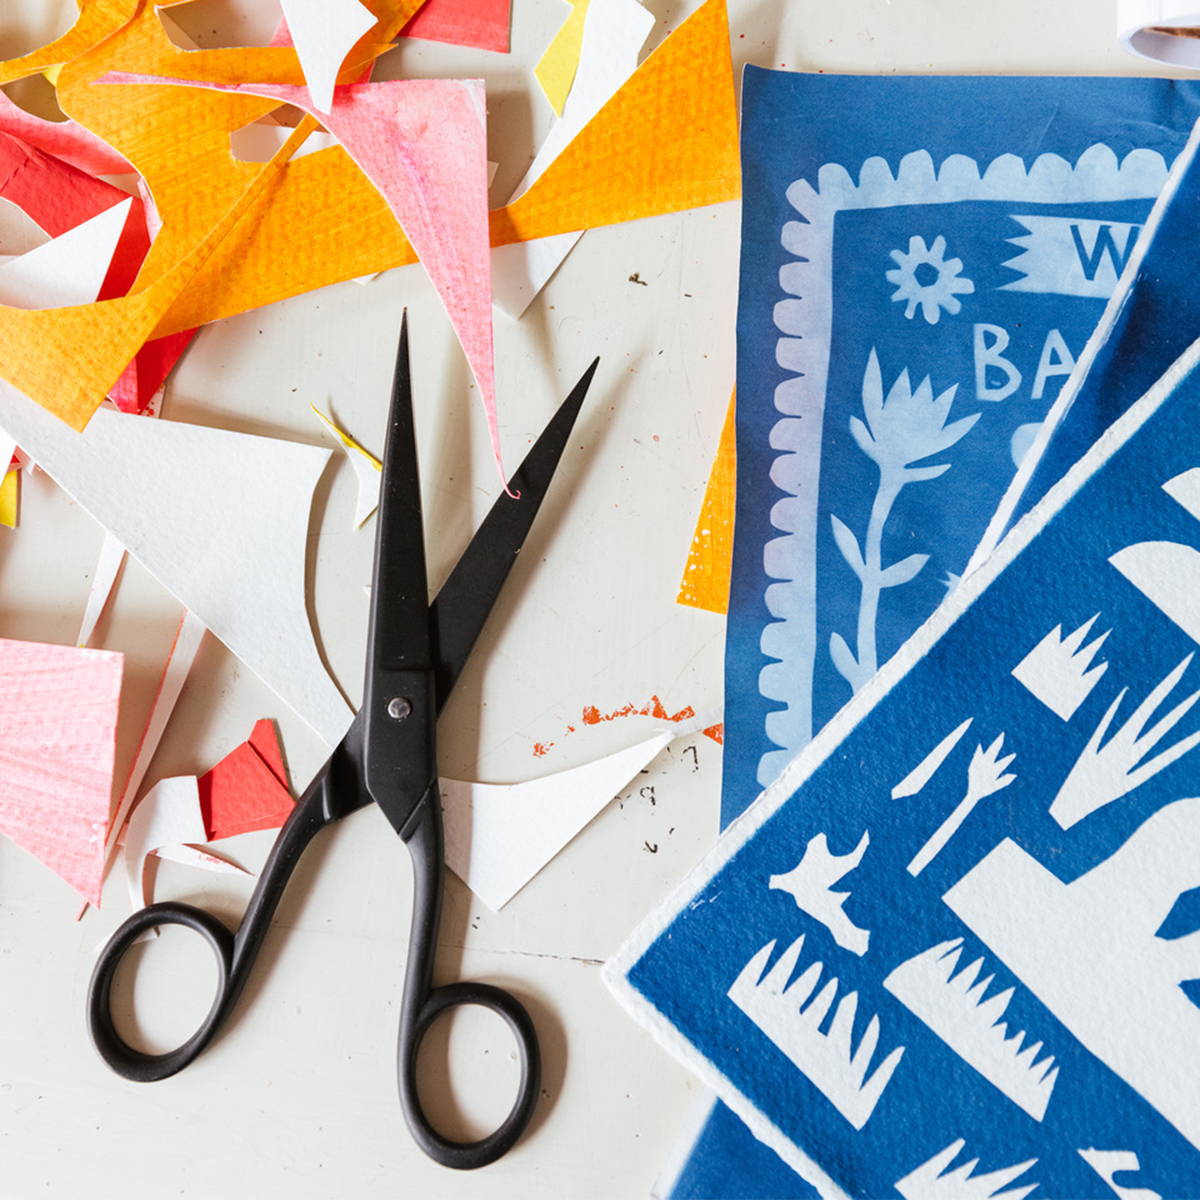 A photograph of scissors and paper cuttings.